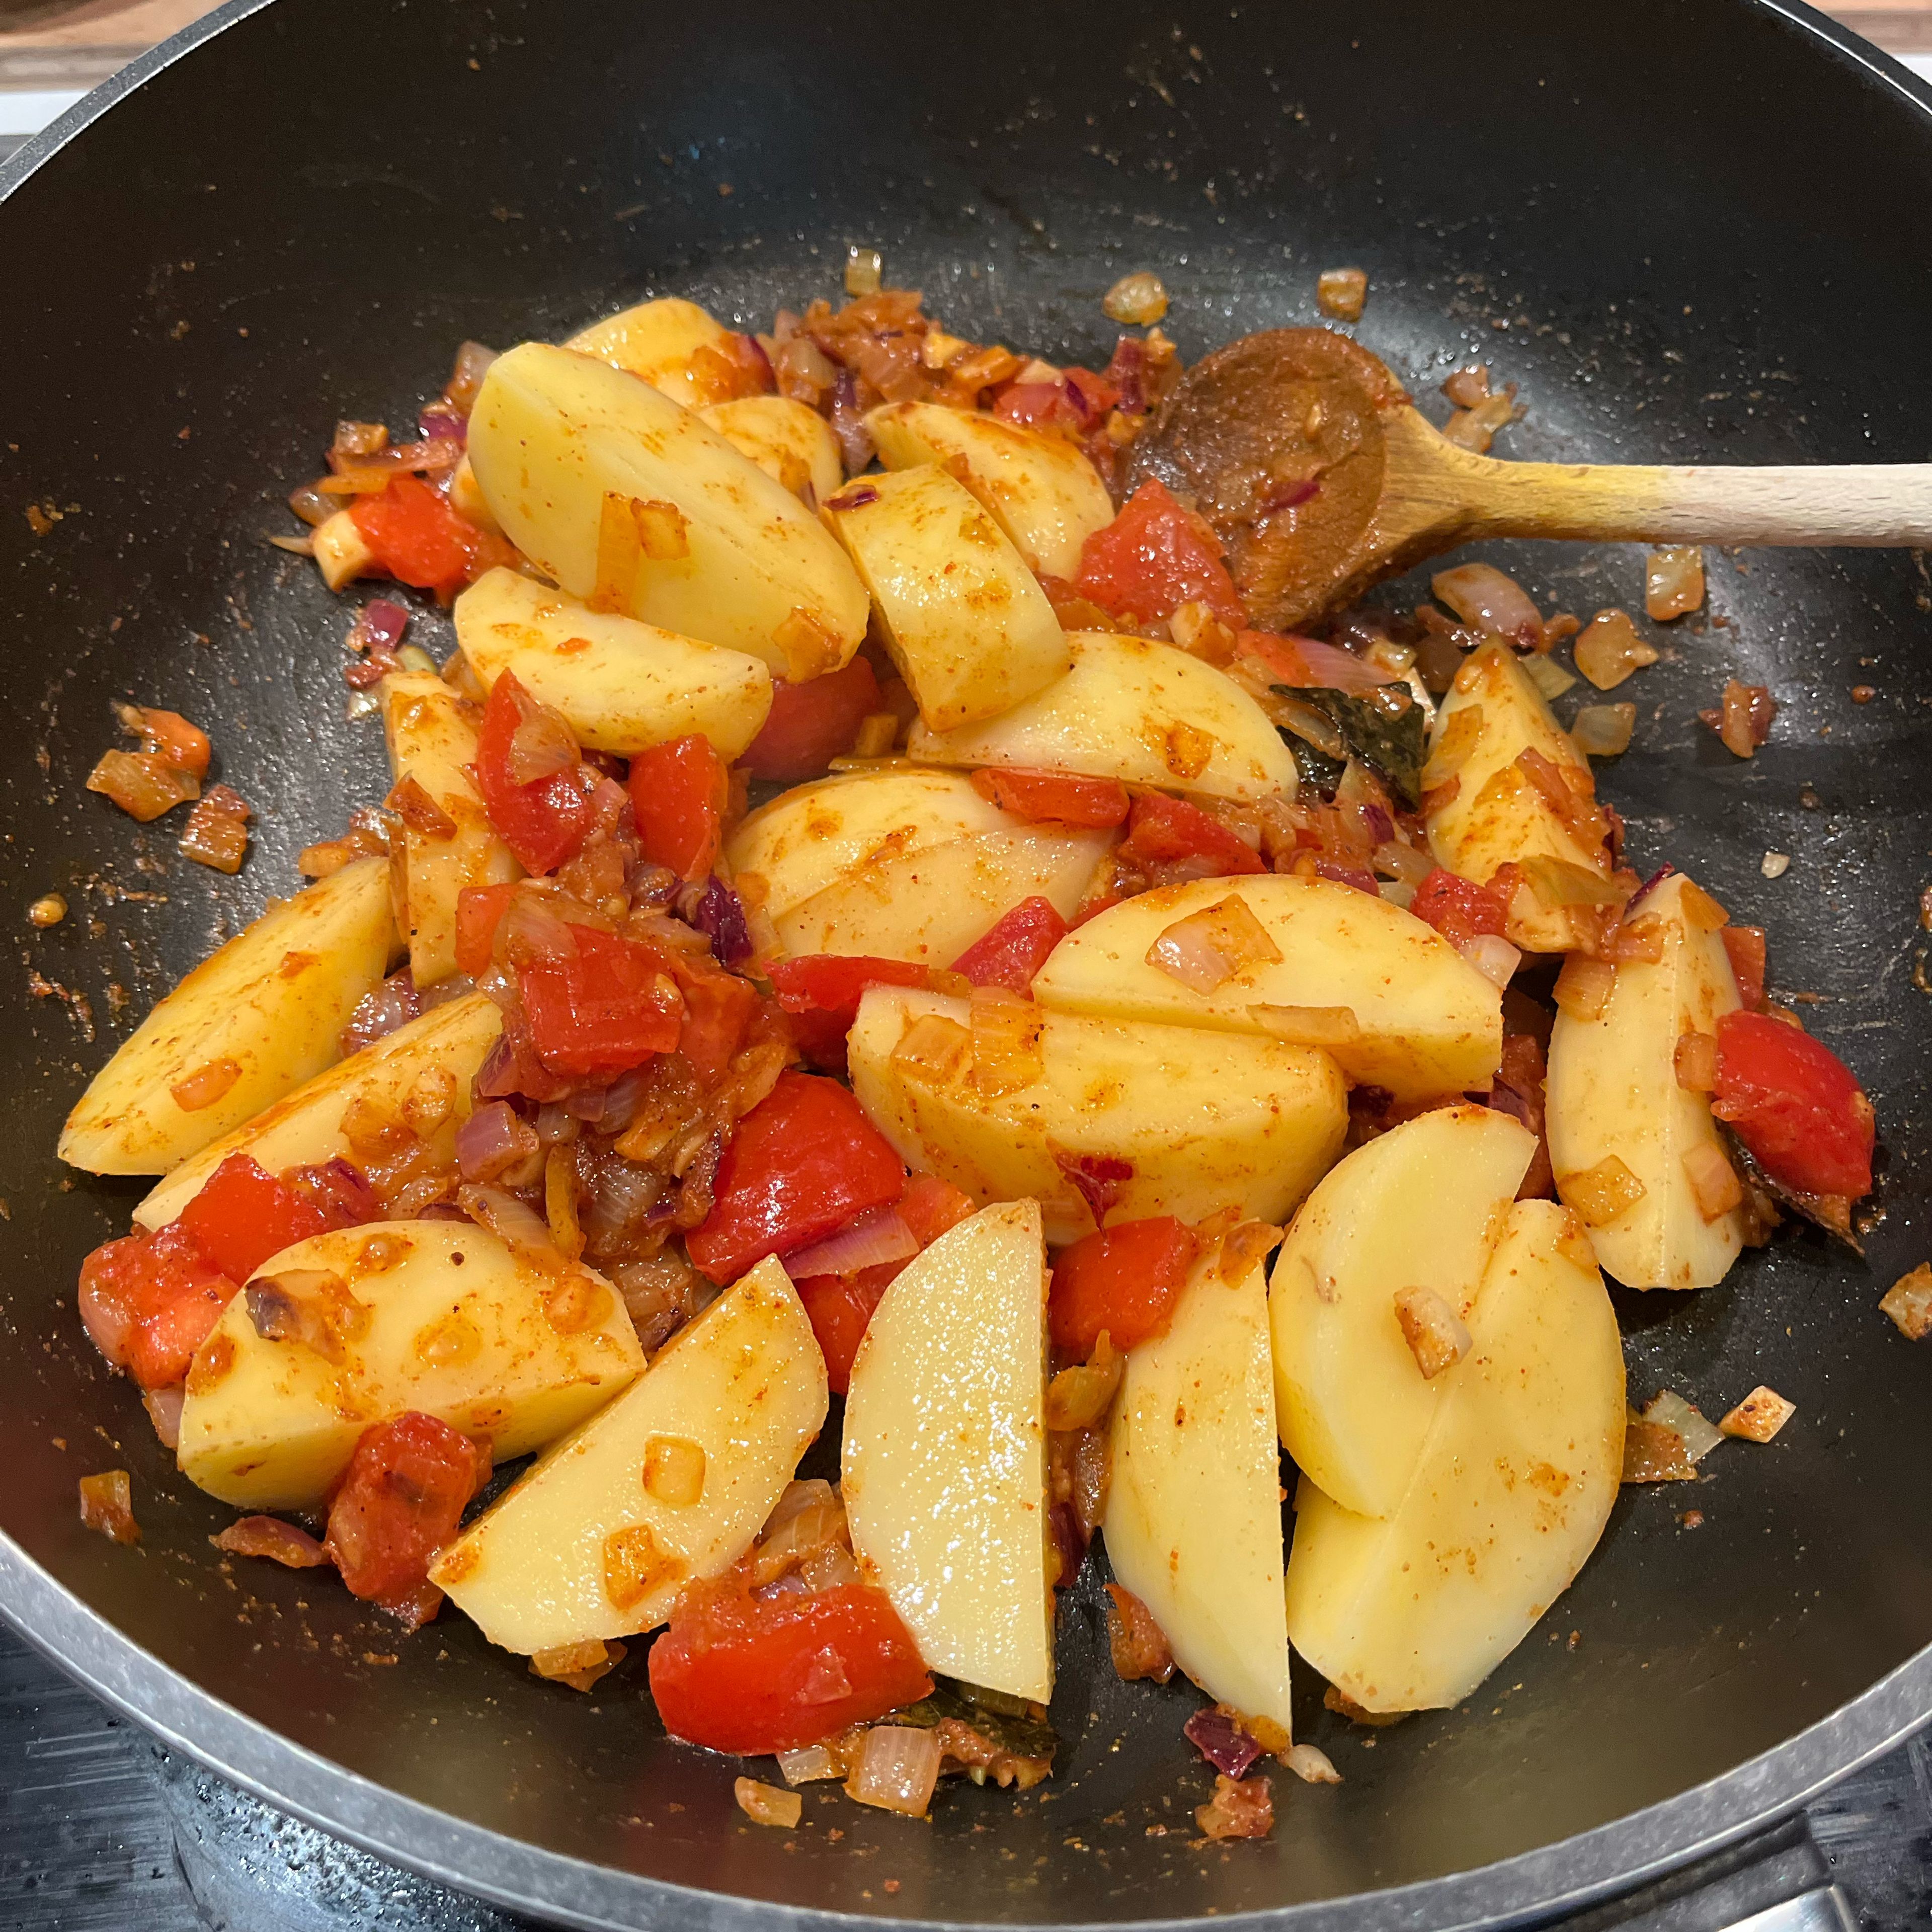 Add potatoes and stir. Add 250ml of water, bring to boil, cover with a lid and simmer on medium heat till potatoes are done, about 15min.